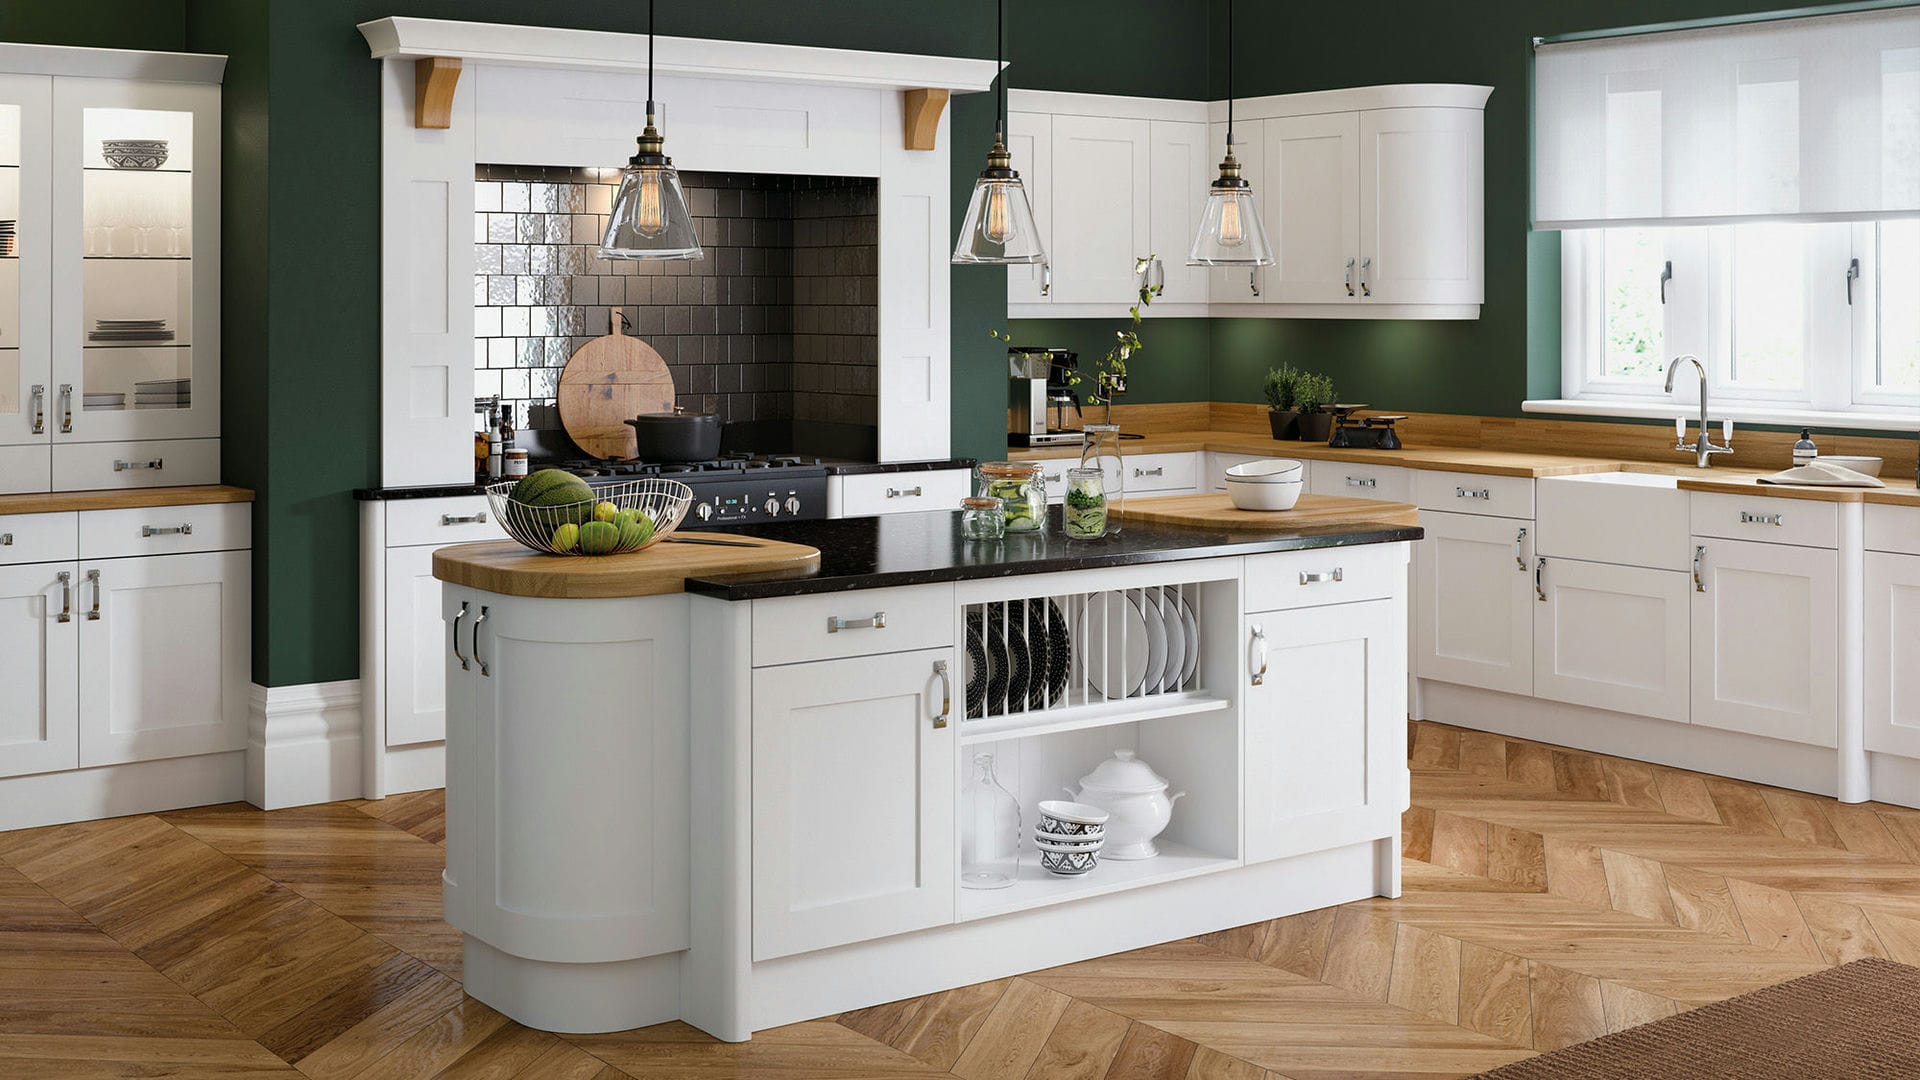 Georgia white smooth shaker kitchens, merging classic shaker style with a sleek, contemporary finish